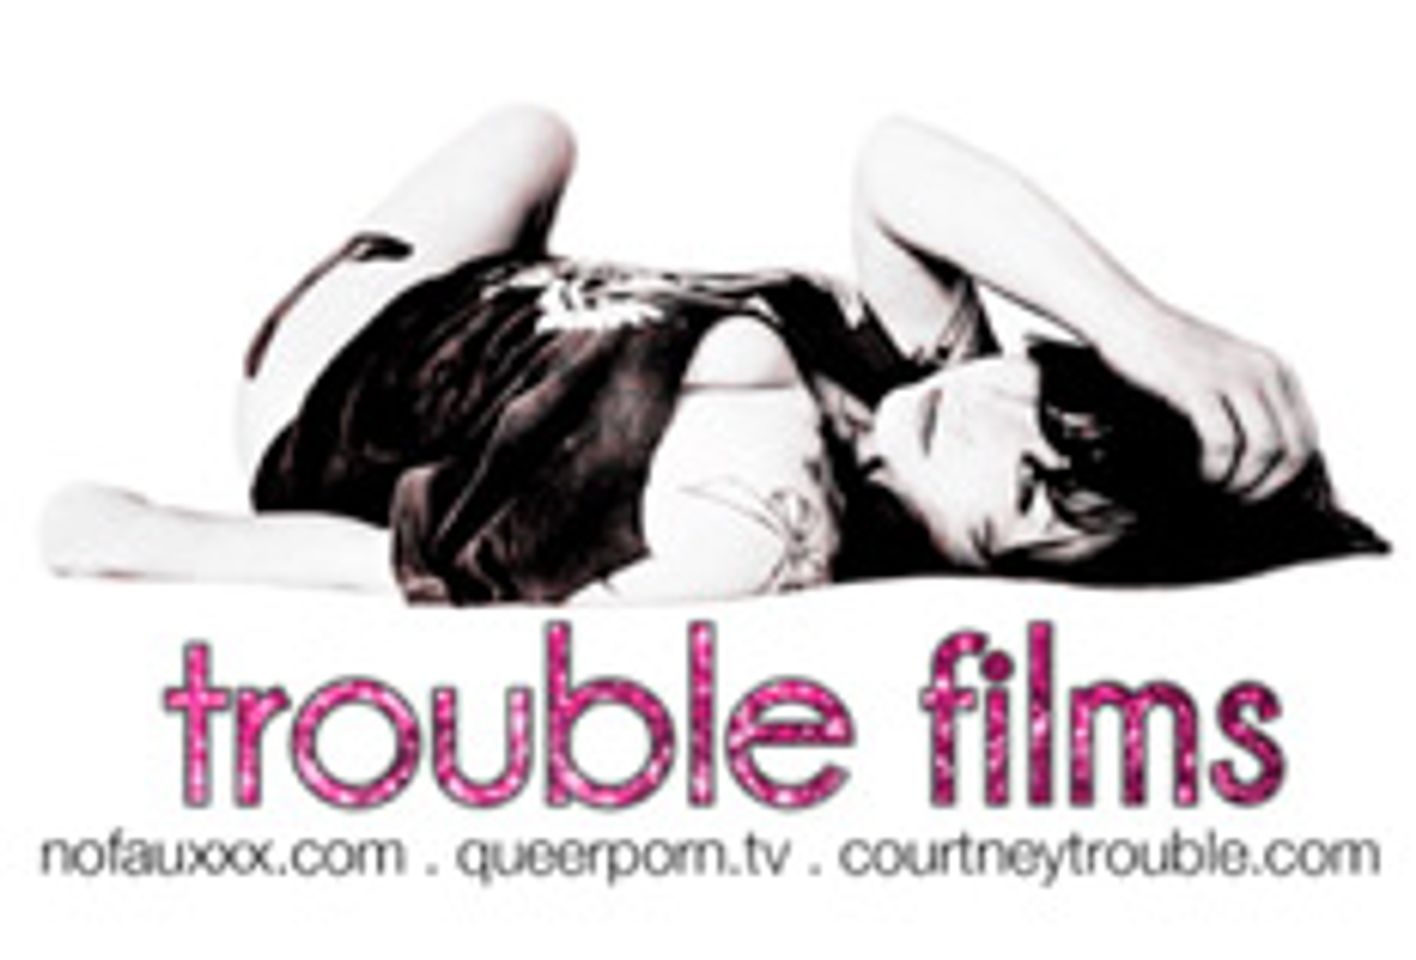 Trouble Films Streets 'Lesbian Curves 2: Hard Femme' Today